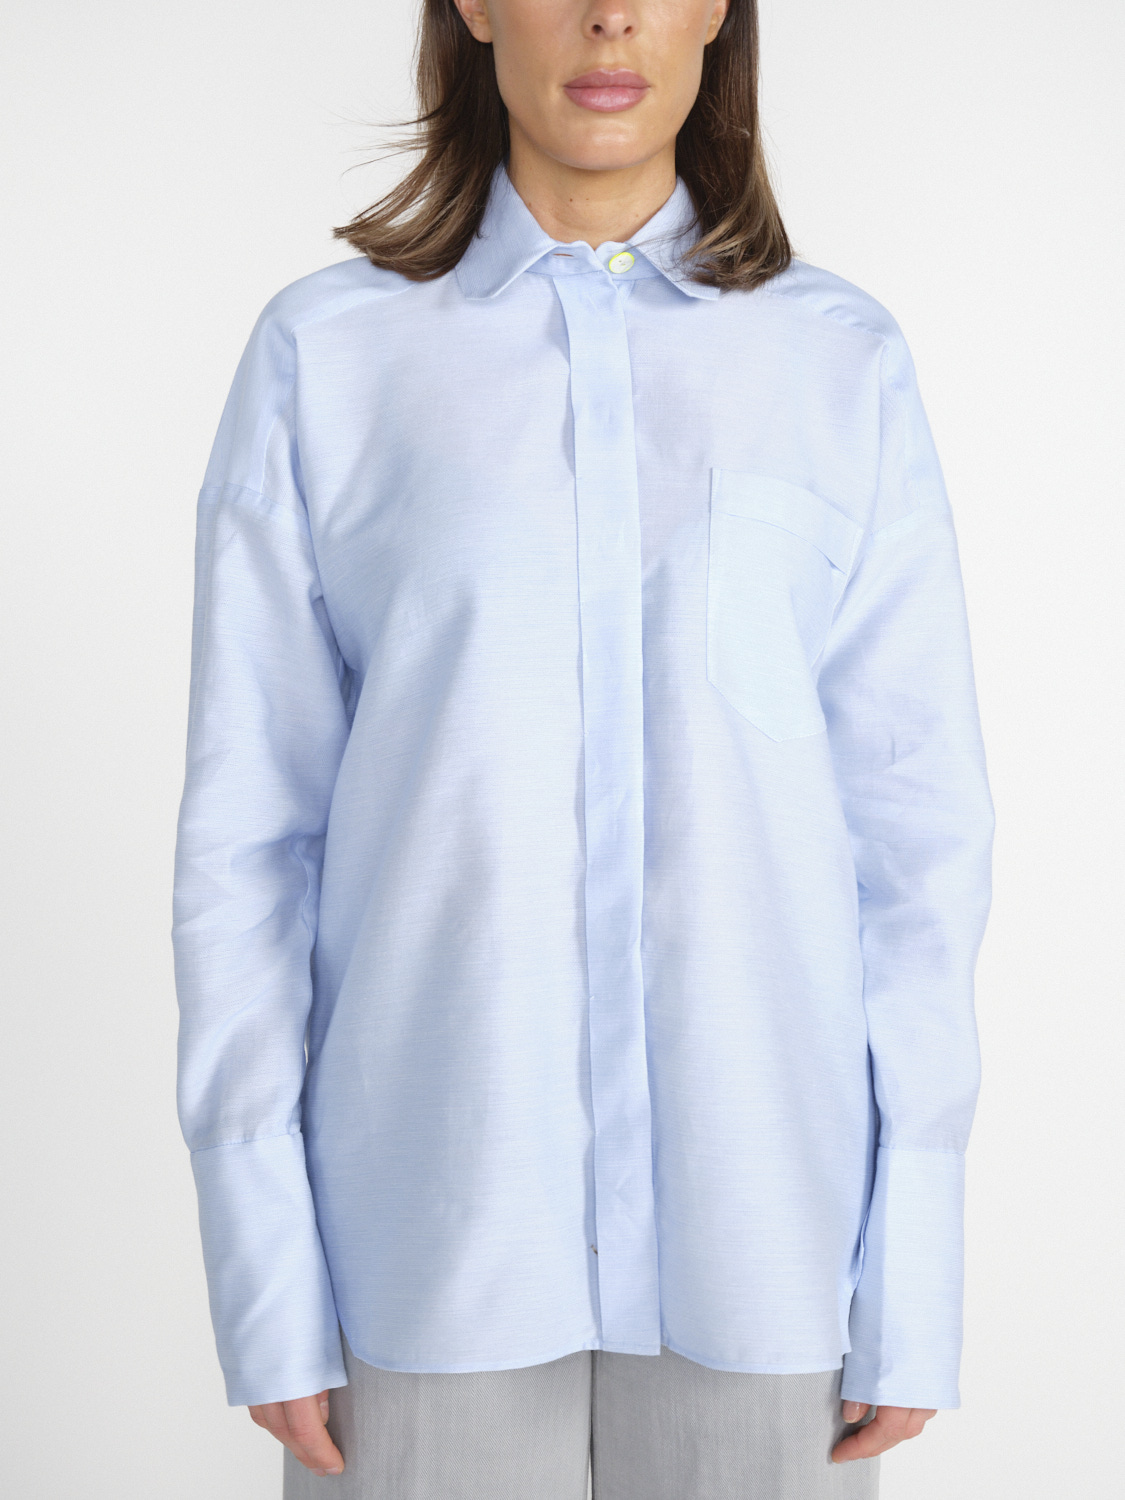 Antonia Zander Blouse made from a cotton-silk mix  hellblau S